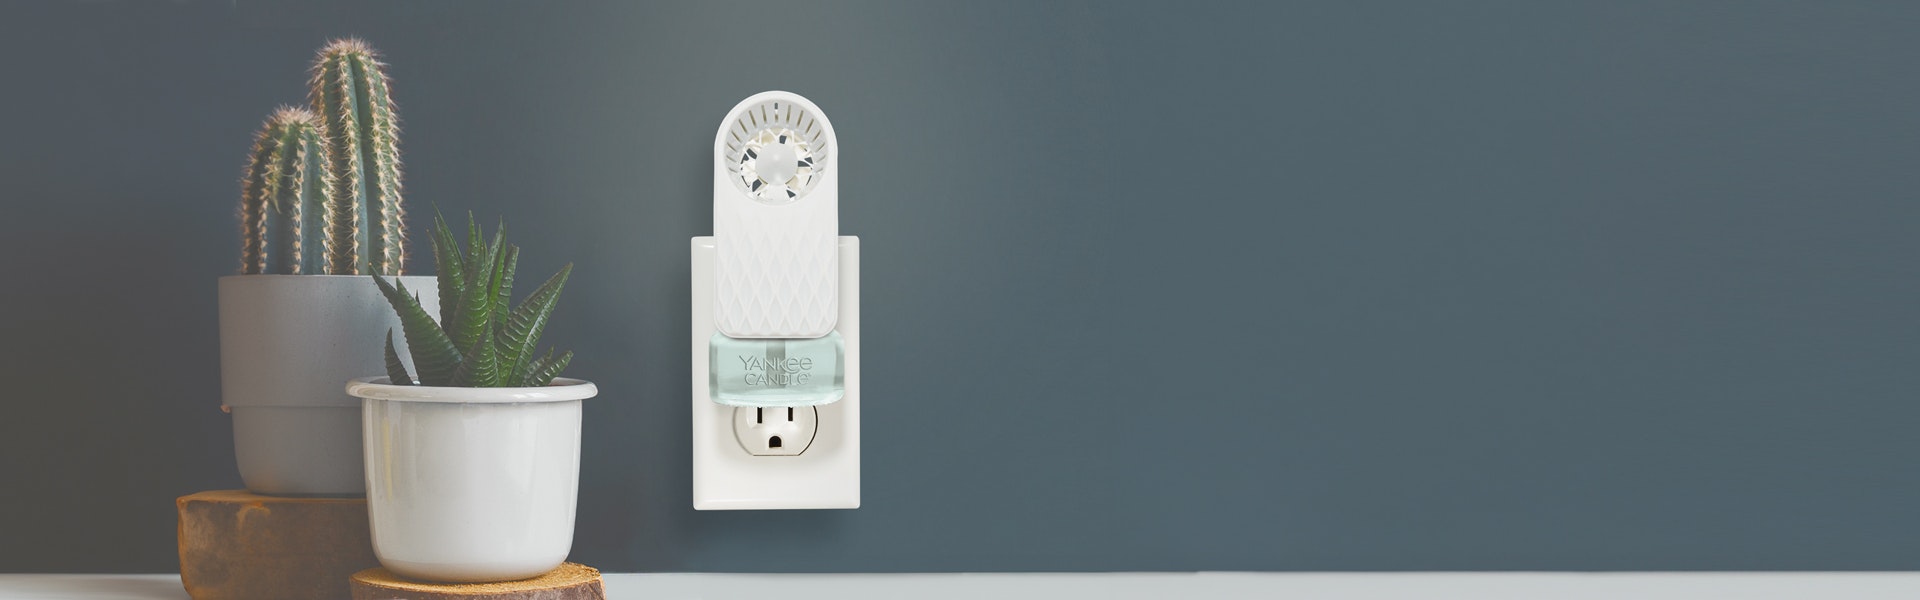 Fade ScentPlug Fan with a light blue-colored ScentPlug Refill plugged into a socket next to two plants